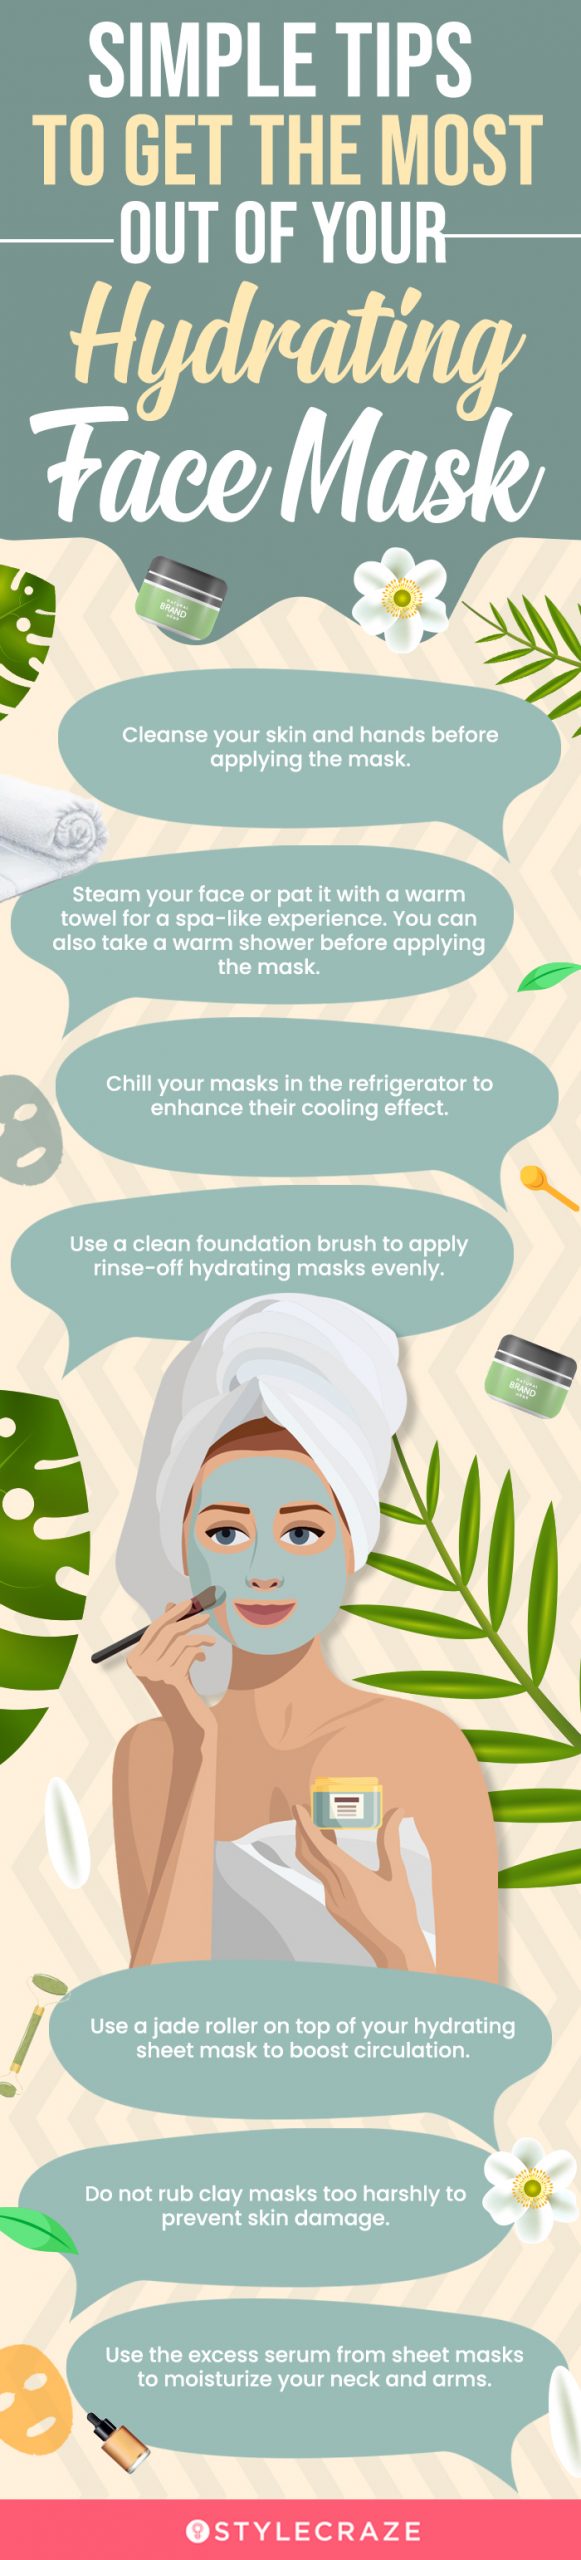 Simple Tips To Get The Most Out Of Your Hydrating Face Mask(infographic)